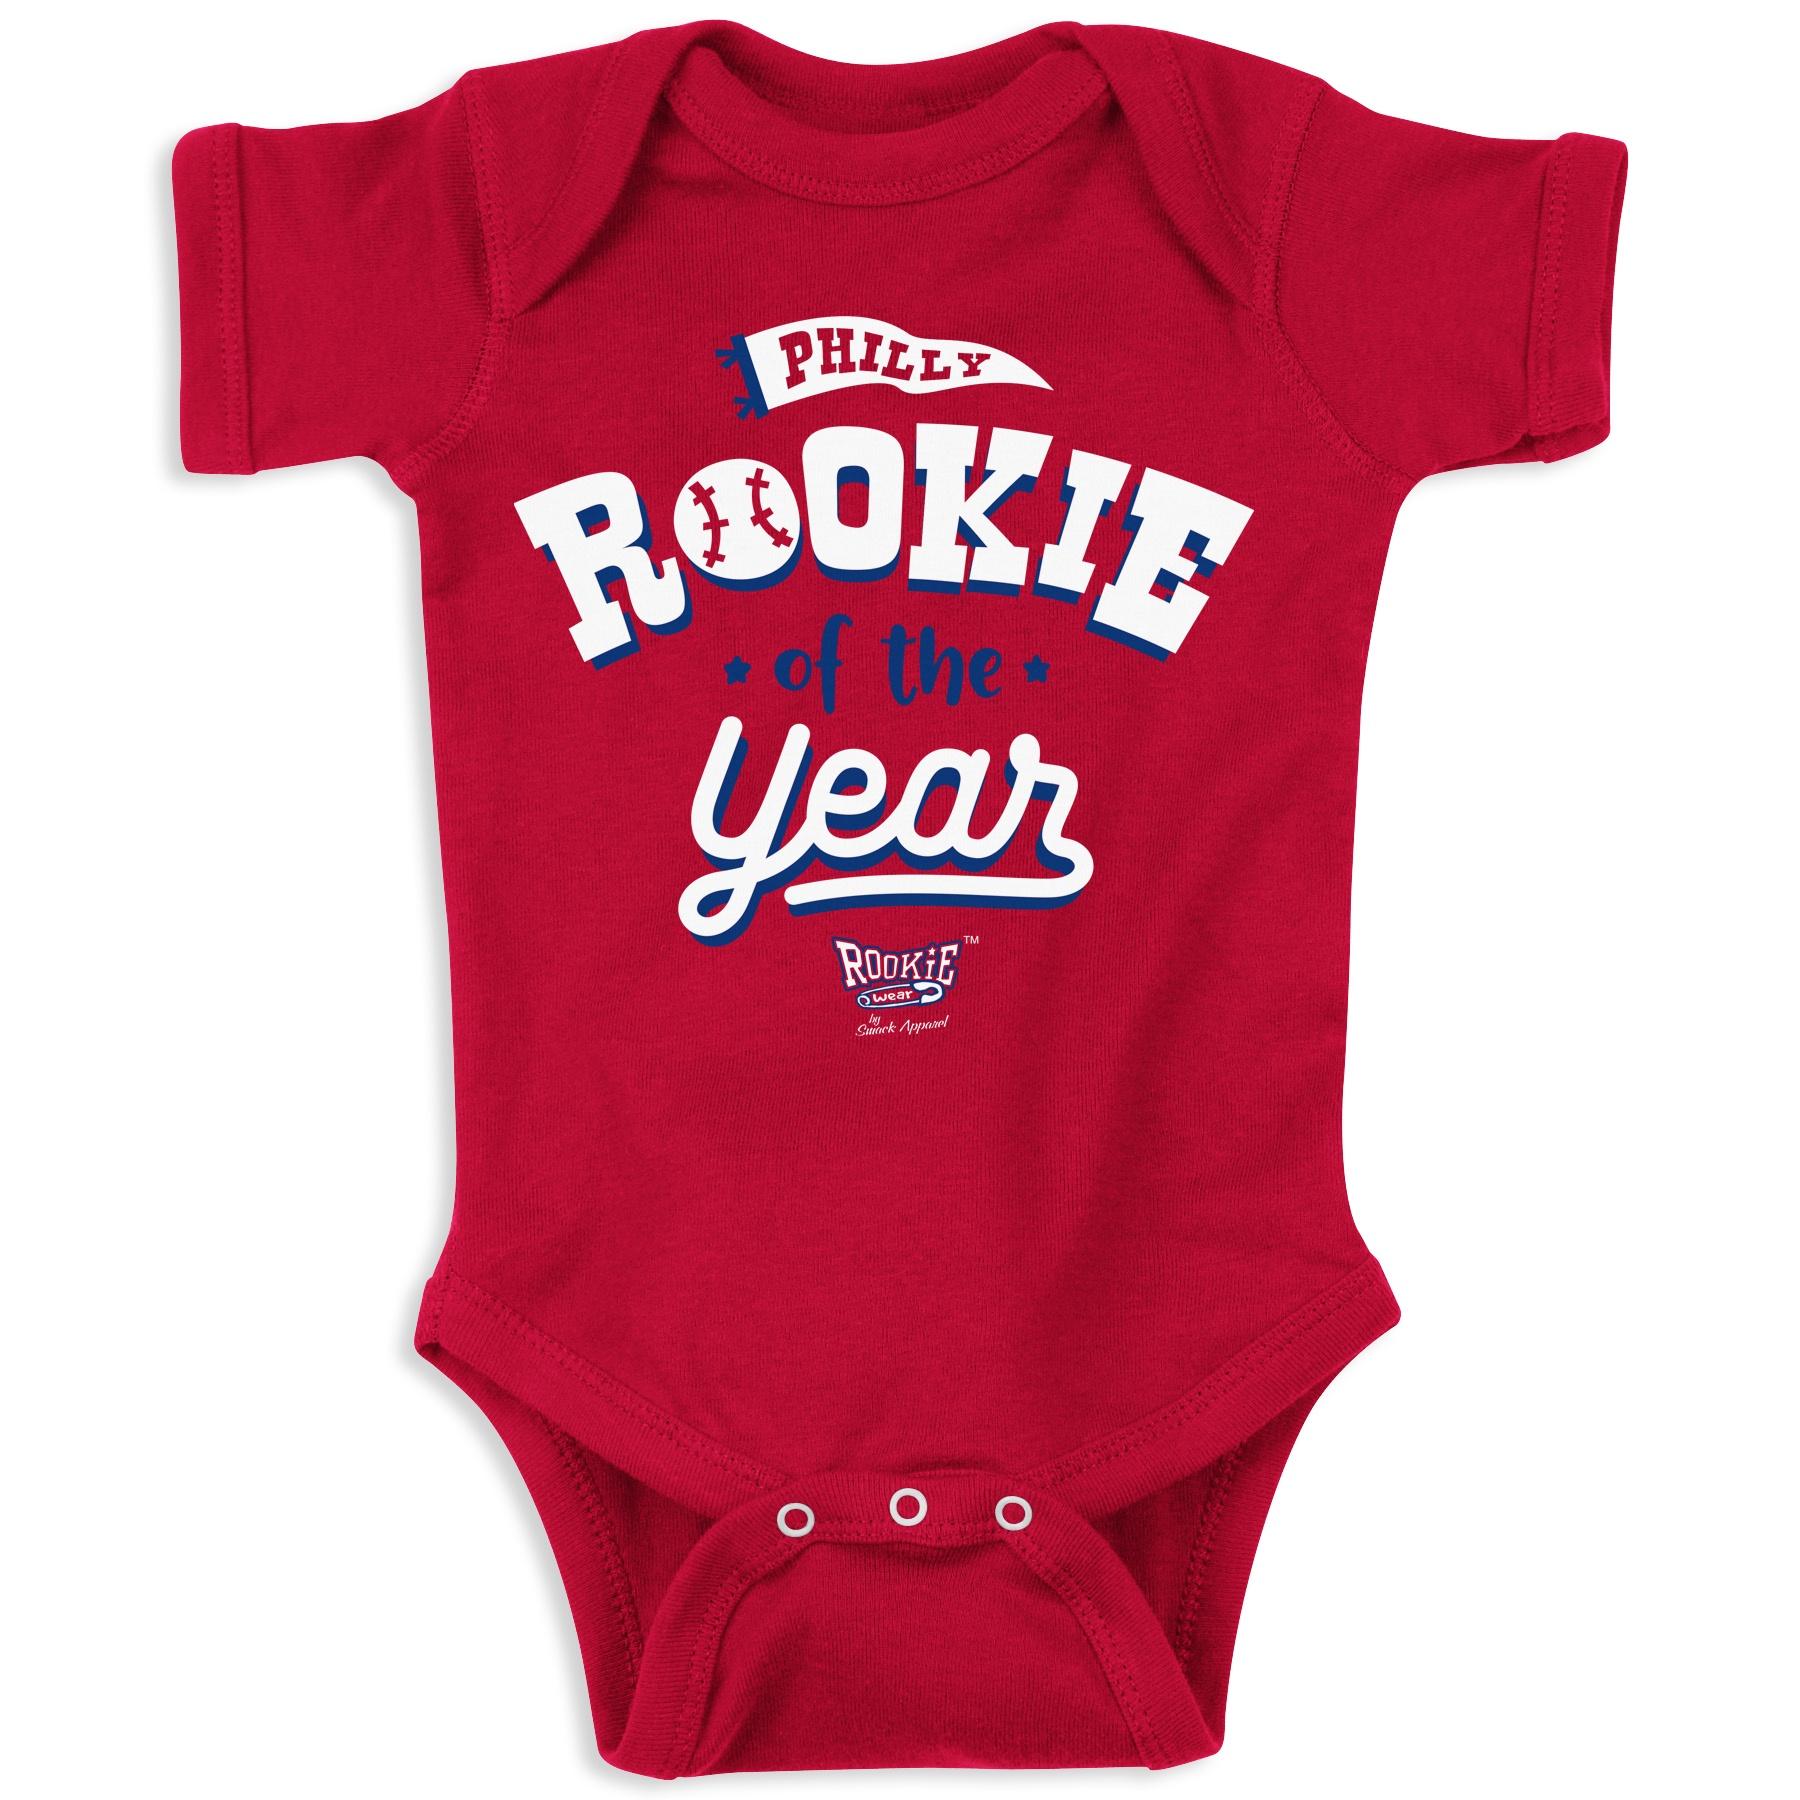 Rookie Of the Year Baby Apparel for Philadelphia Baseball Fans (NB-7T)